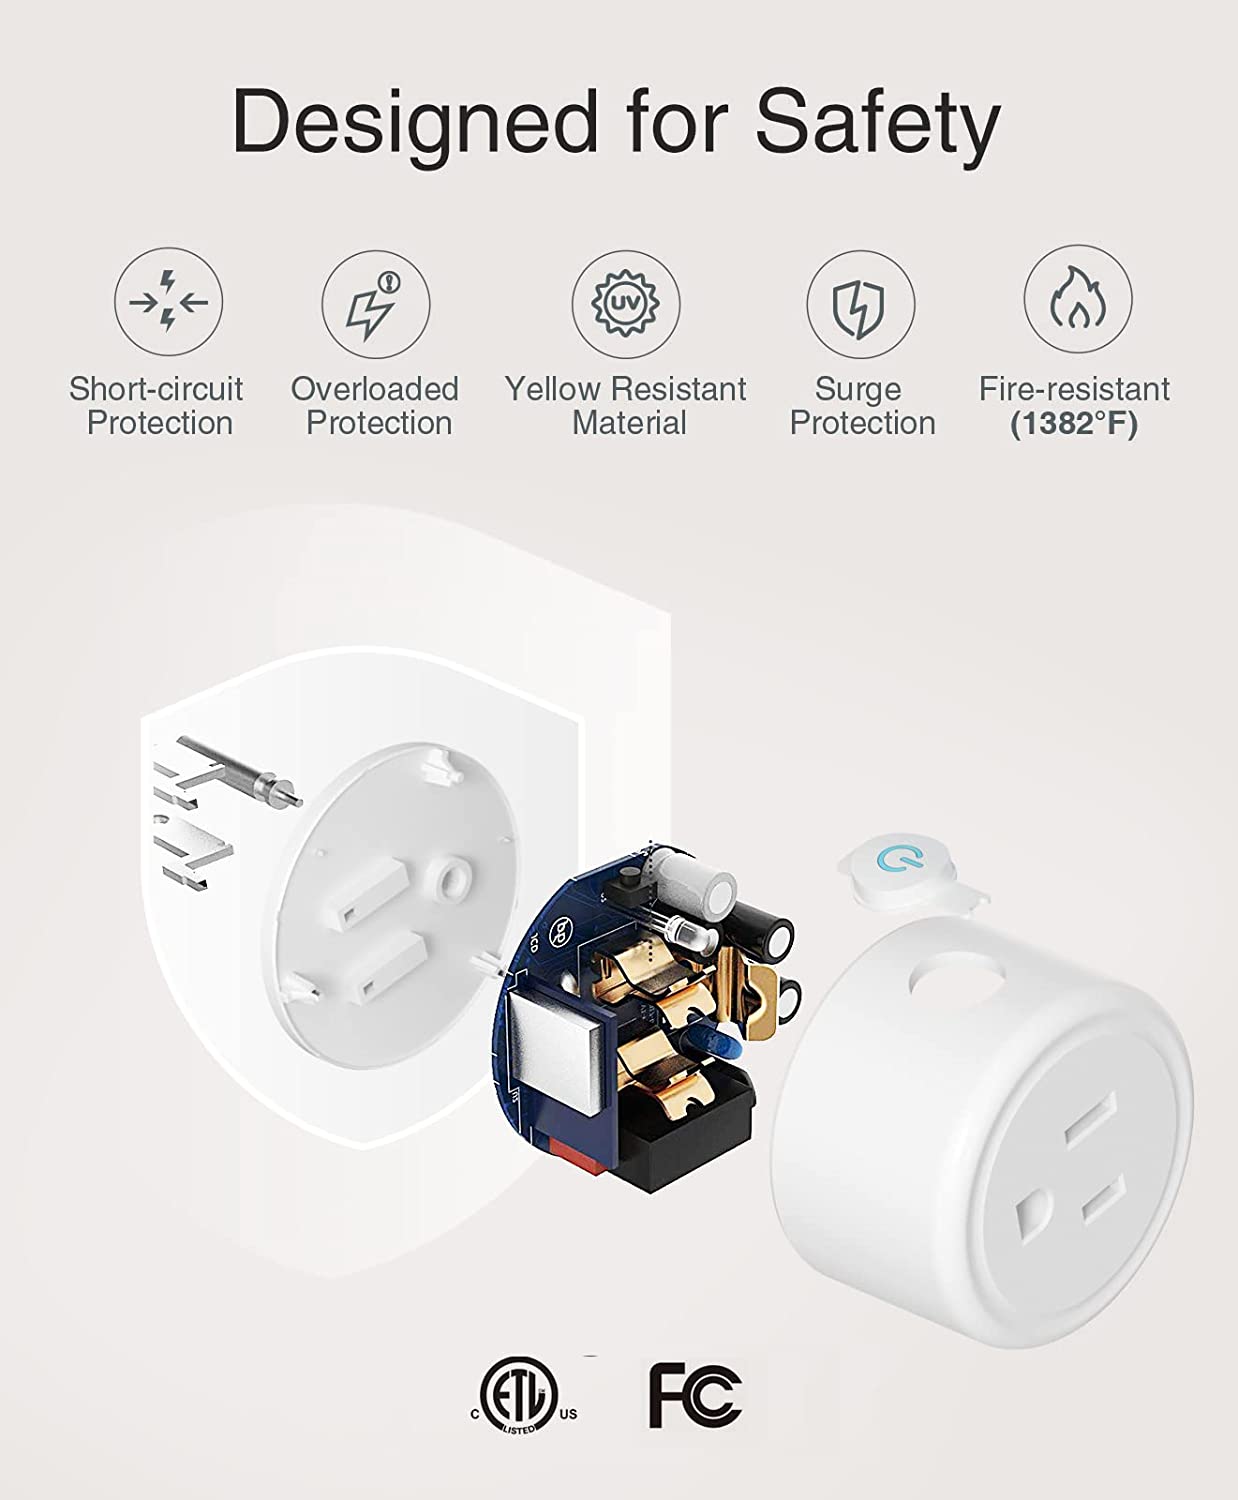 GHome Smart Mini Plug Compatible with Alexa and Google Home, WiFi Outlet Socket Remote Control with Timer Function, Only Supports 2.4GHz Network, No Hub Required, ETL FCC Listed (1 Pack), White